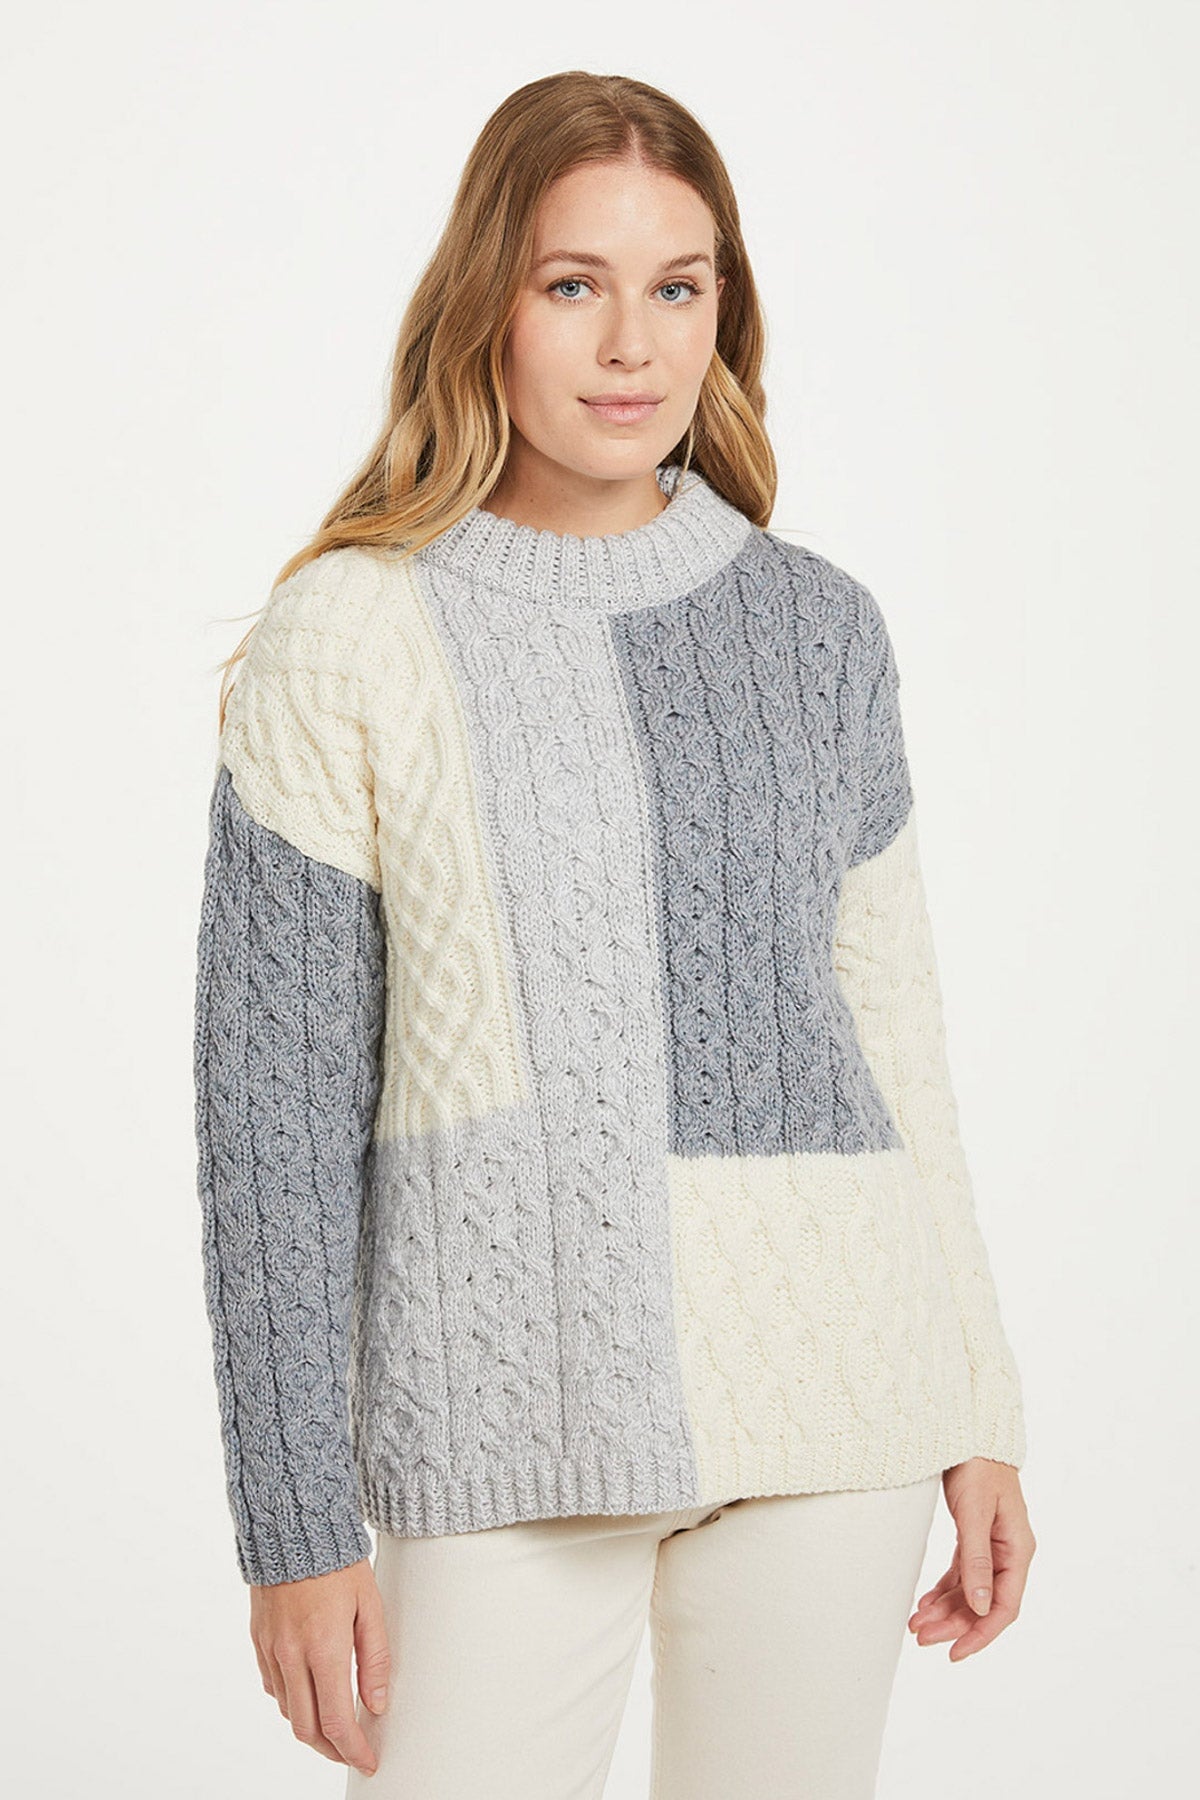 Patchwork Sweater in Cream and Grey